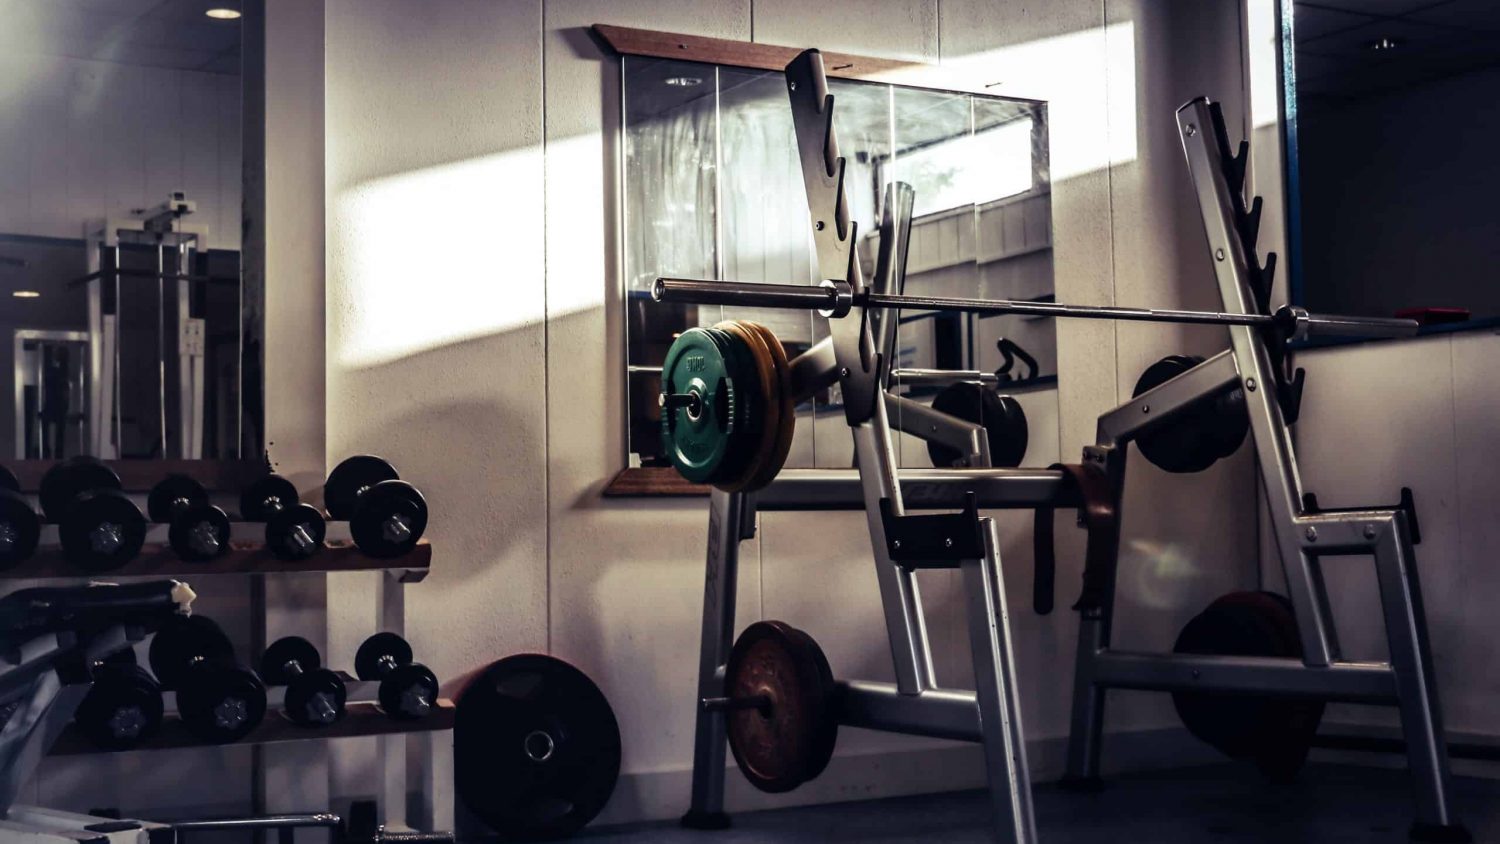 The Best Home Gym Setup – Make The Most Of Your Space